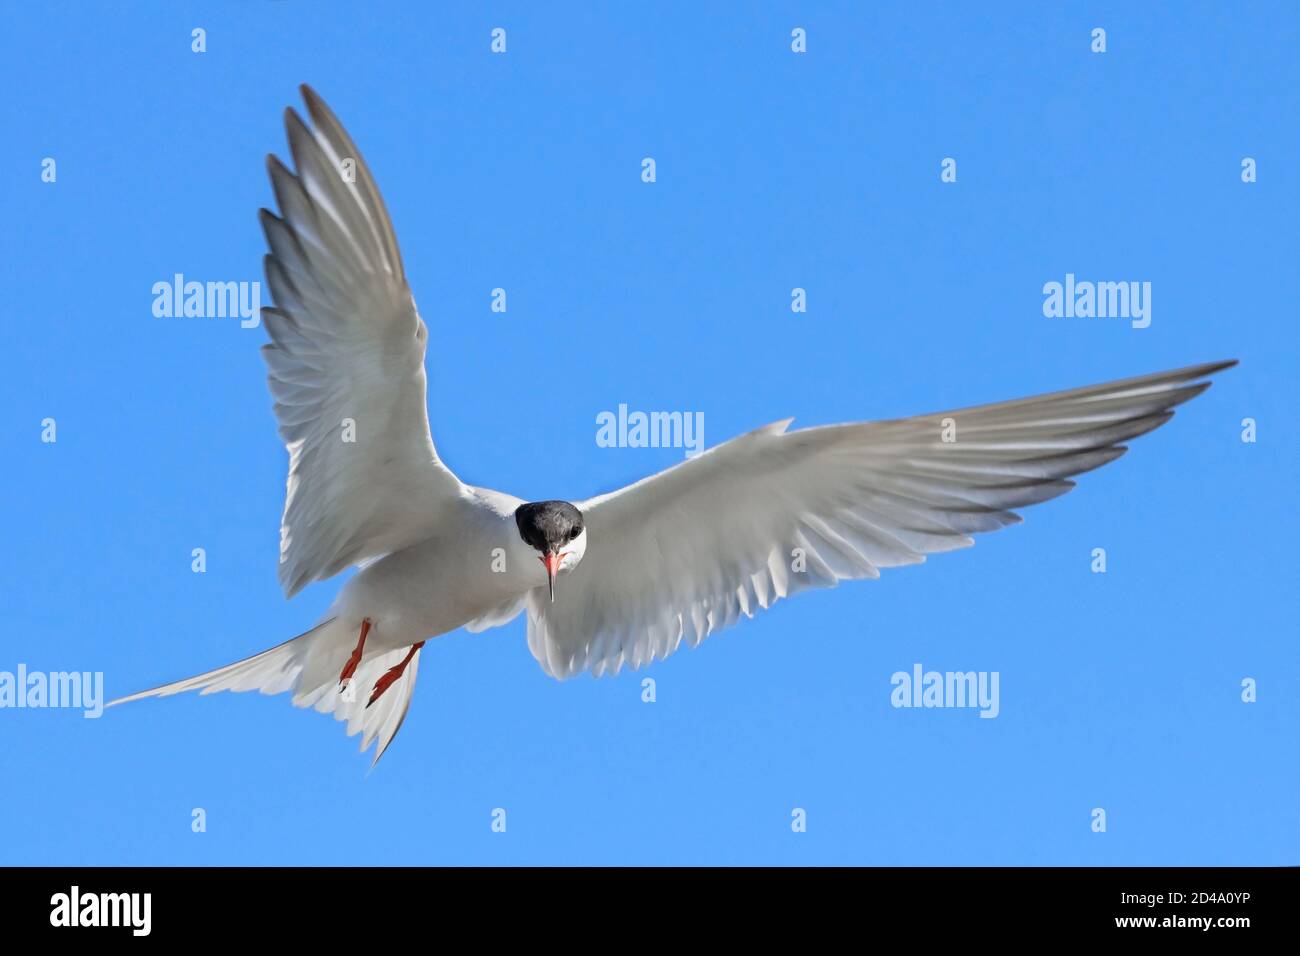 Adult common tern in flight on the blue sky background. Close up, front view. Scientific name: Sterna hirundo Stock Photo